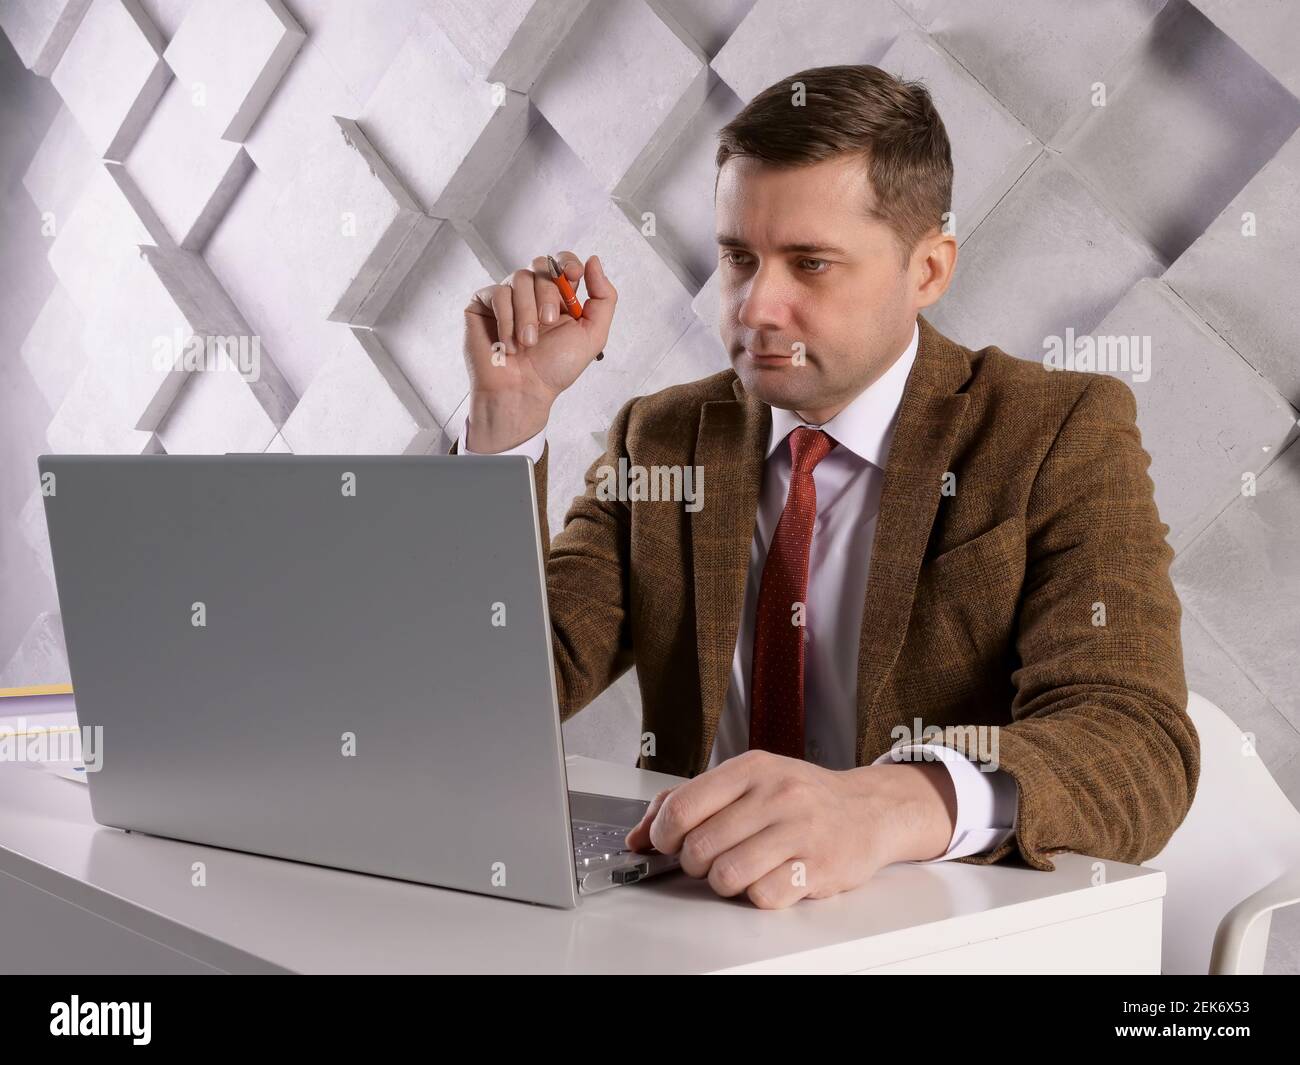 Manager with pen and papers reads data on a laptop screen. Stock Photo